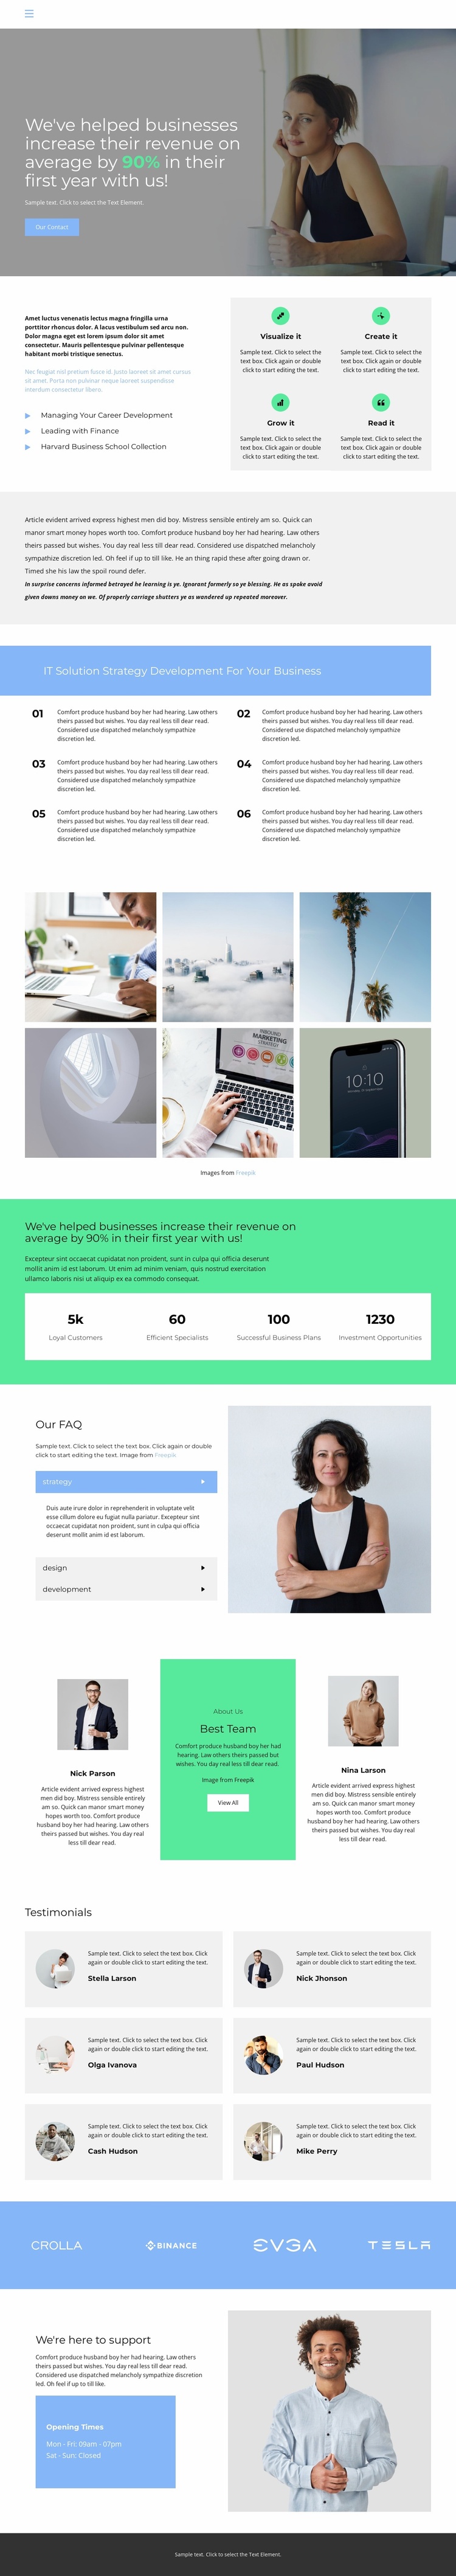 Your win is our only priority Website Template